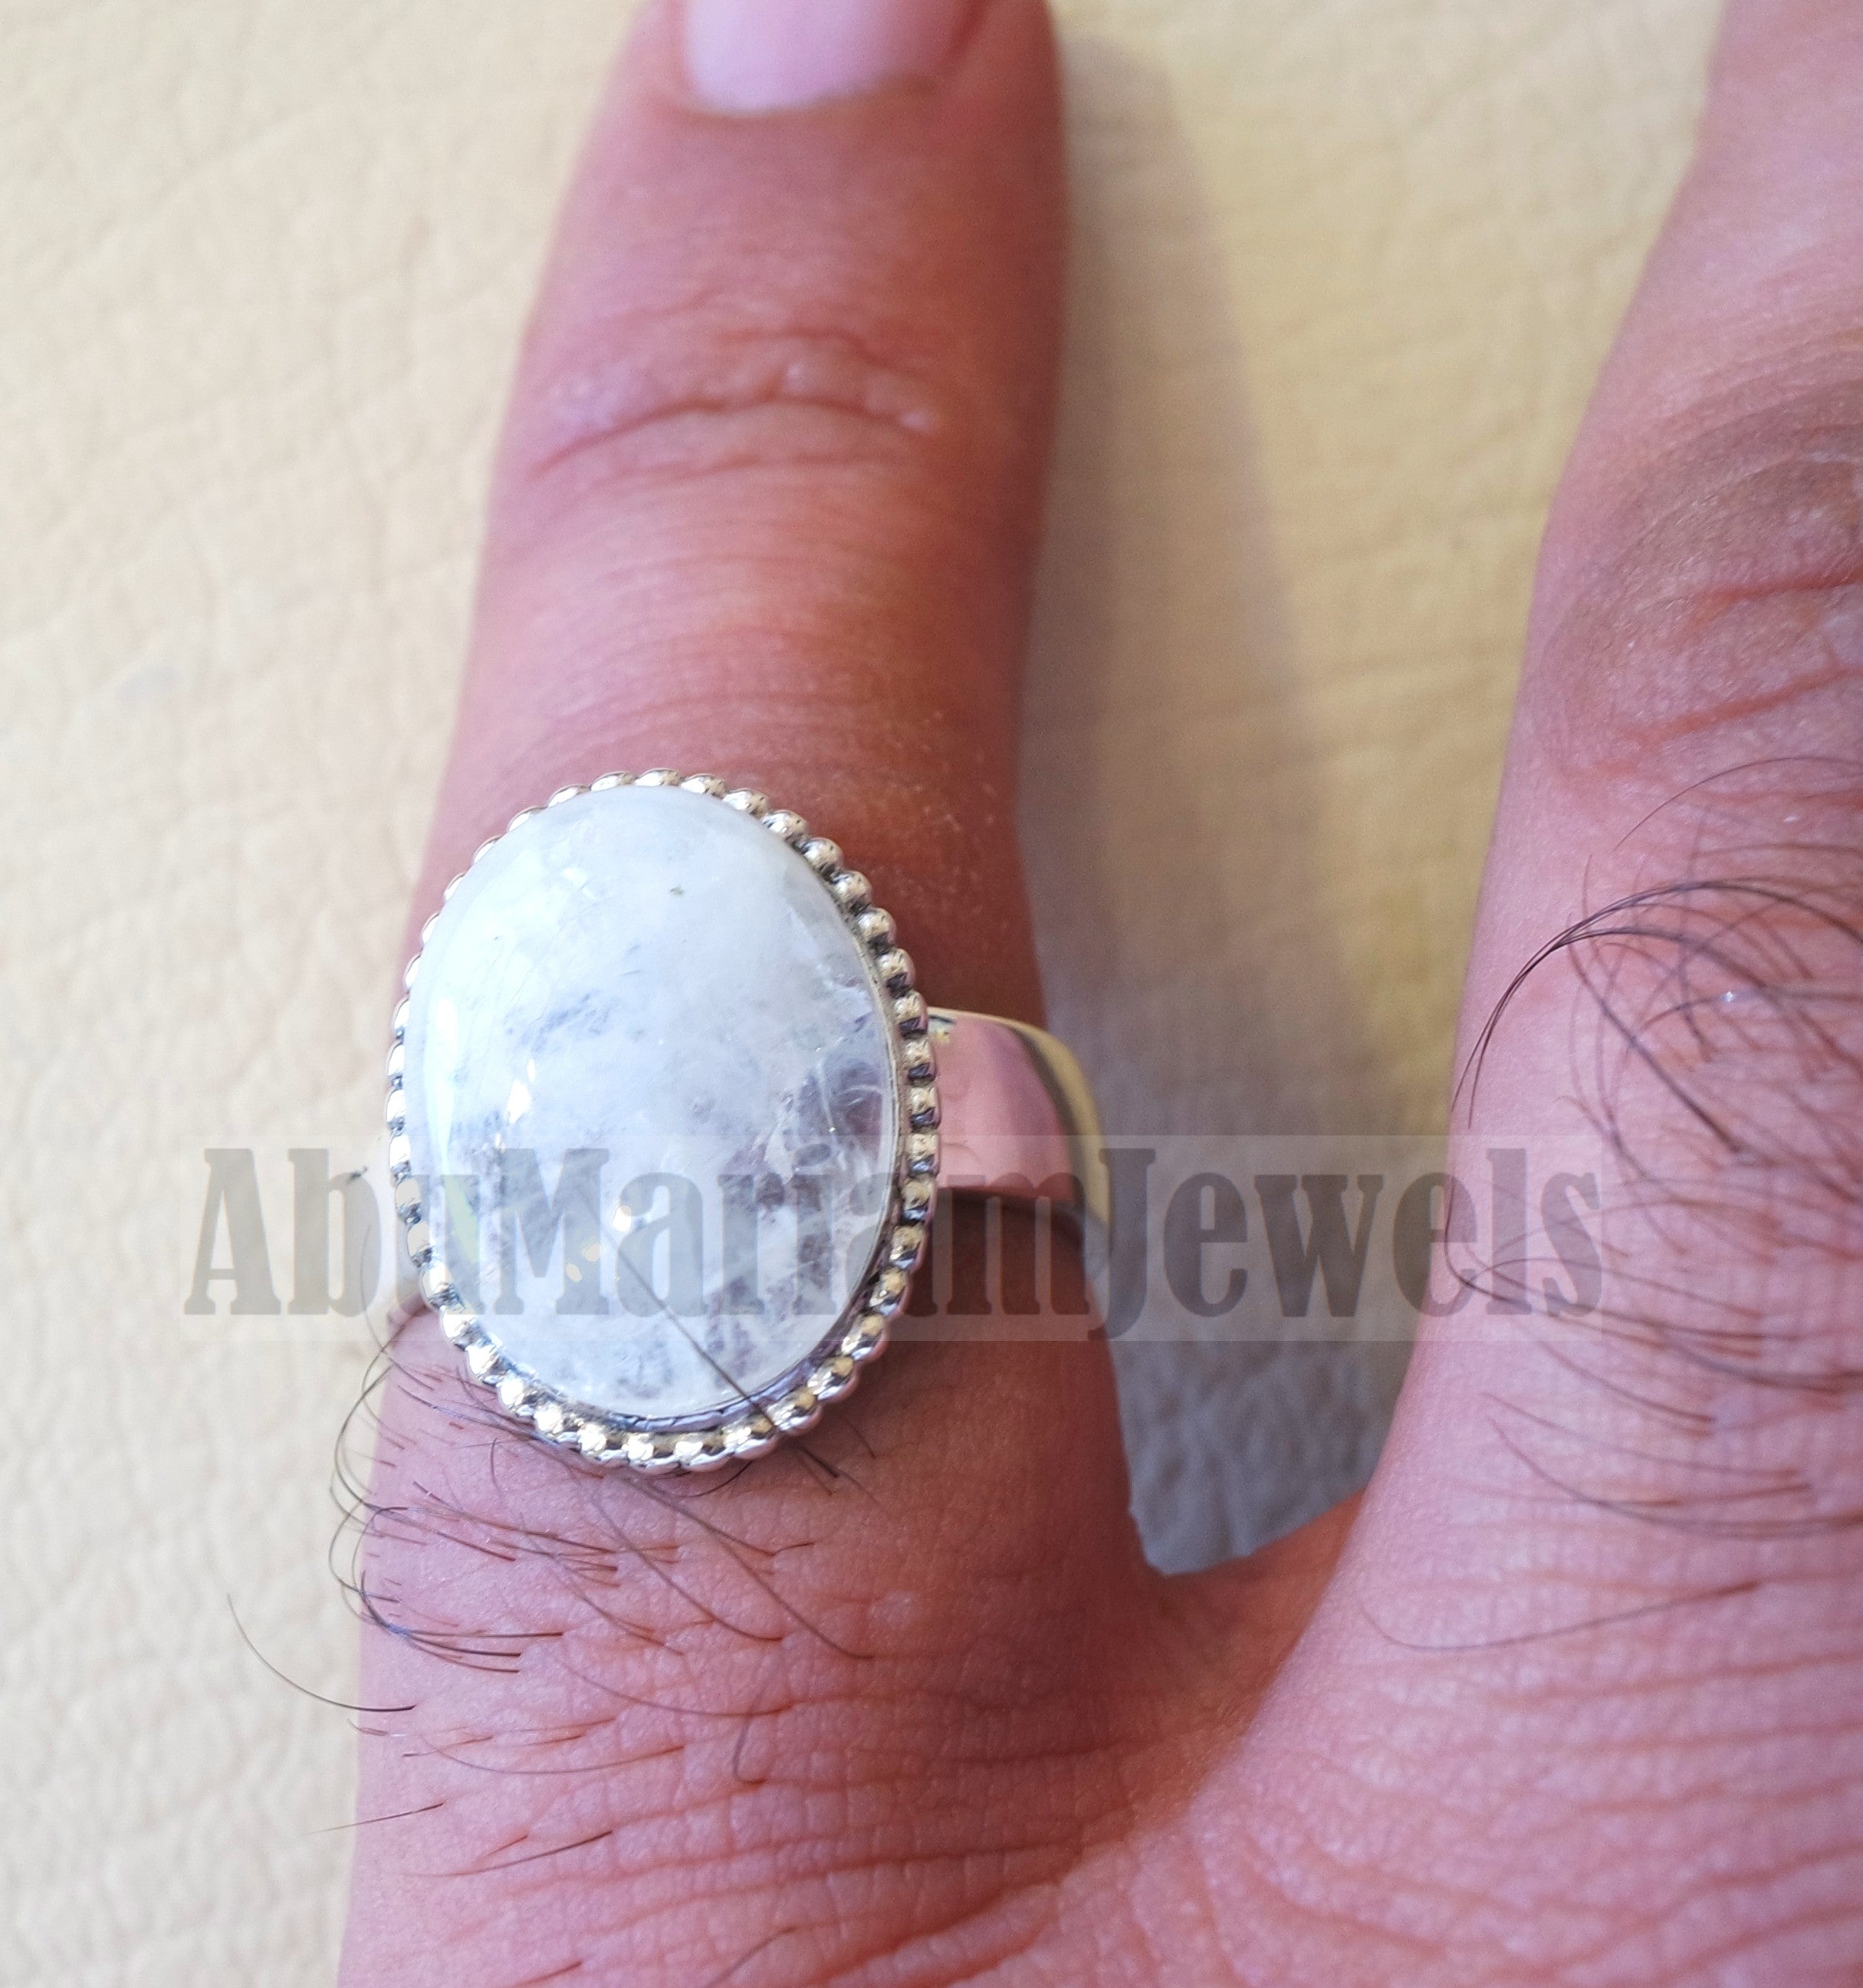 Pinkie men or women ring moonstone skin touching stone sterling silver 925 all sizes high quality natural oval cabochon stone